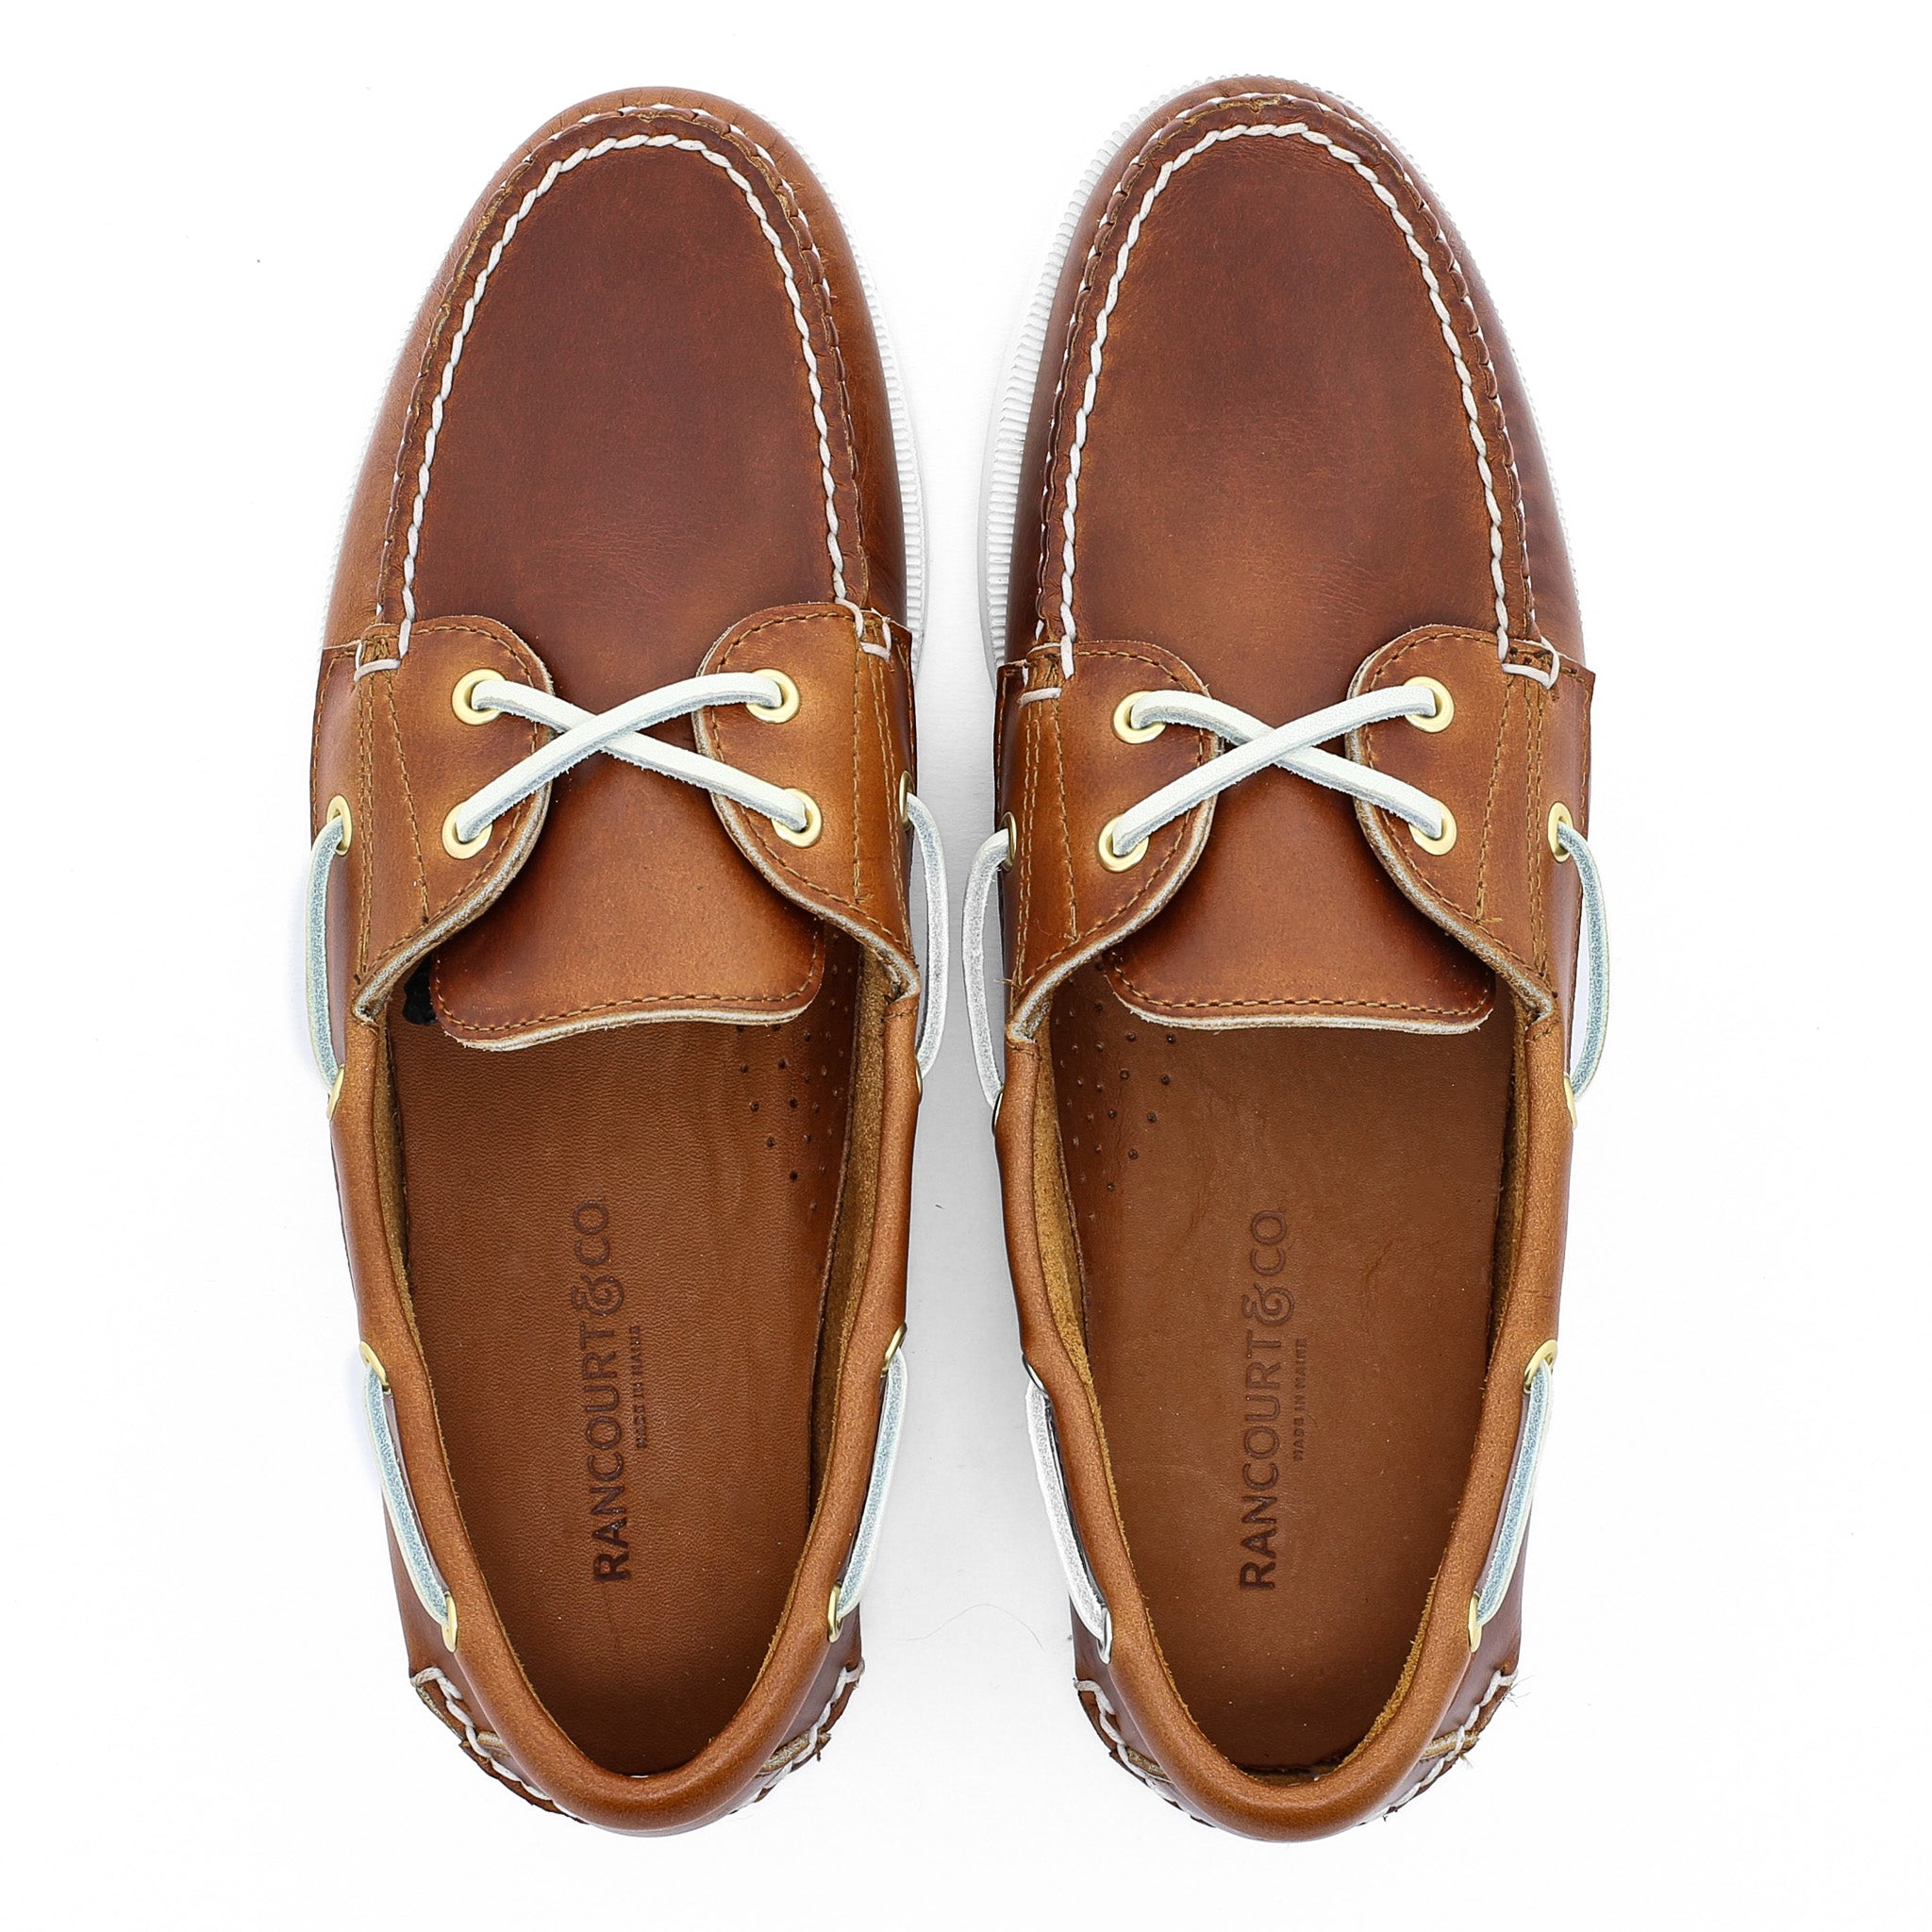 Marion Boat Shoe Chicago Tan | Rancourt & Co. | Men's Boots and Shoes